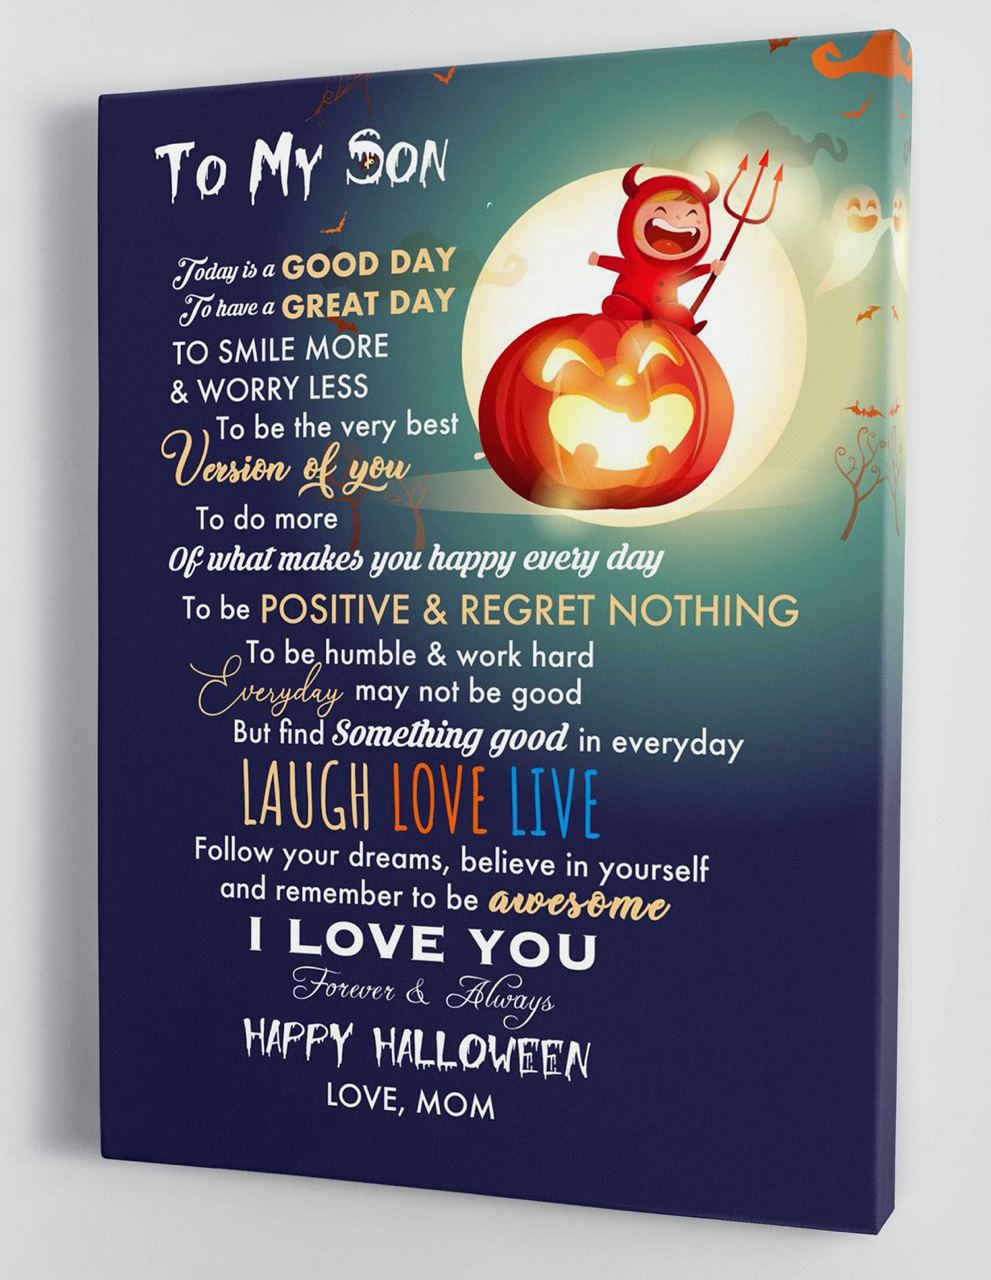 Gifts for Son - From Mom - Halloween Canvas Gift MS052